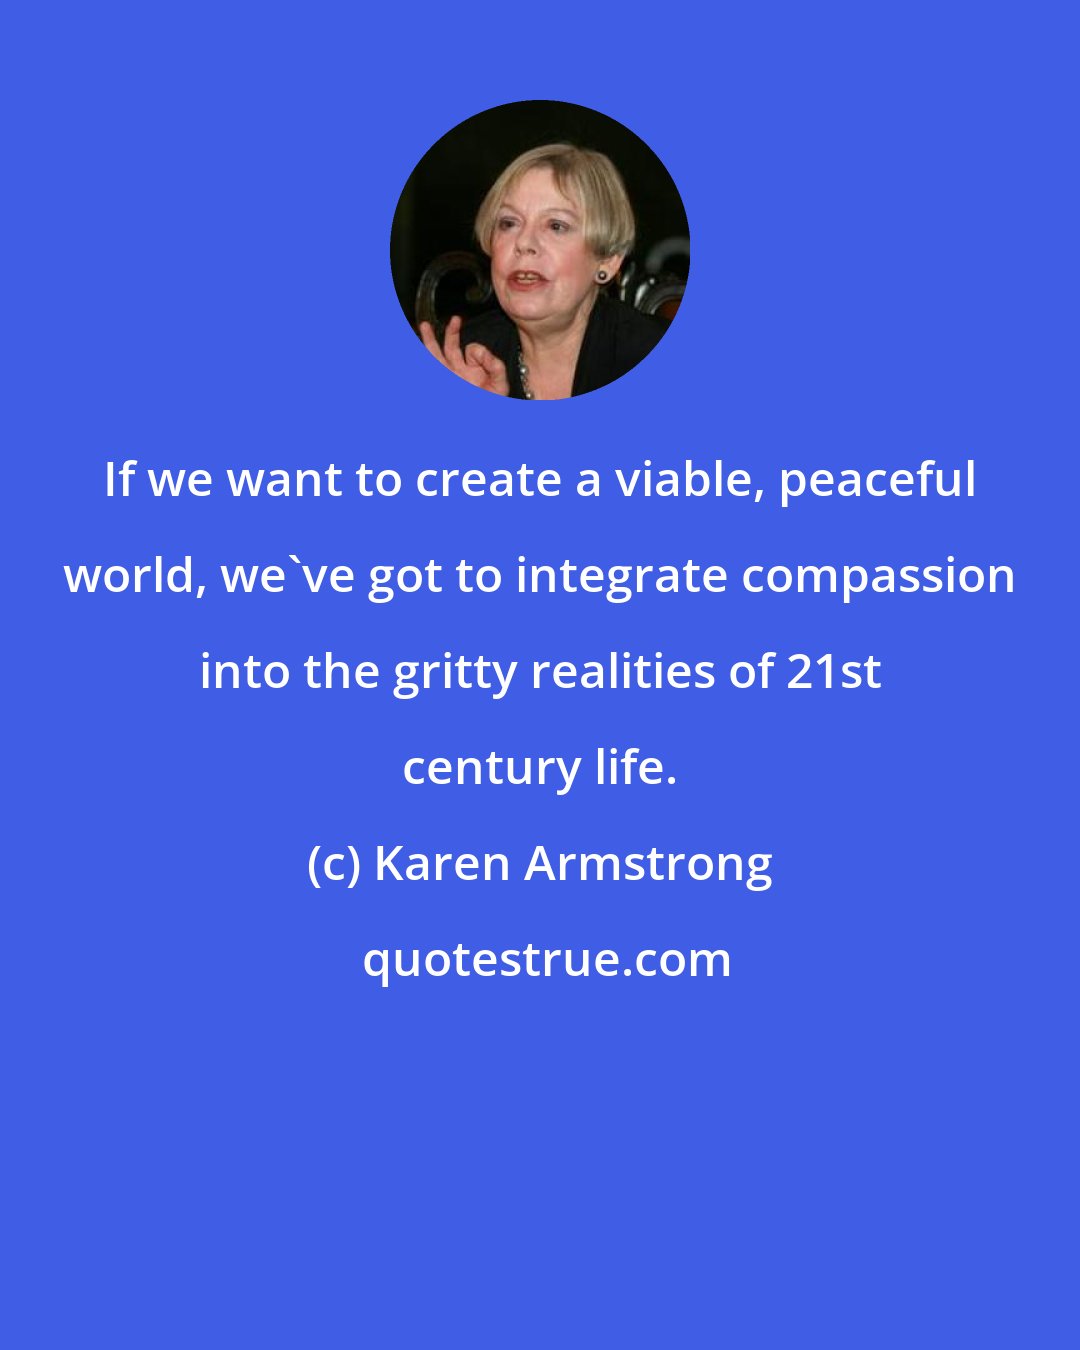 Karen Armstrong: If we want to create a viable, peaceful world, we've got to integrate compassion into the gritty realities of 21st century life.